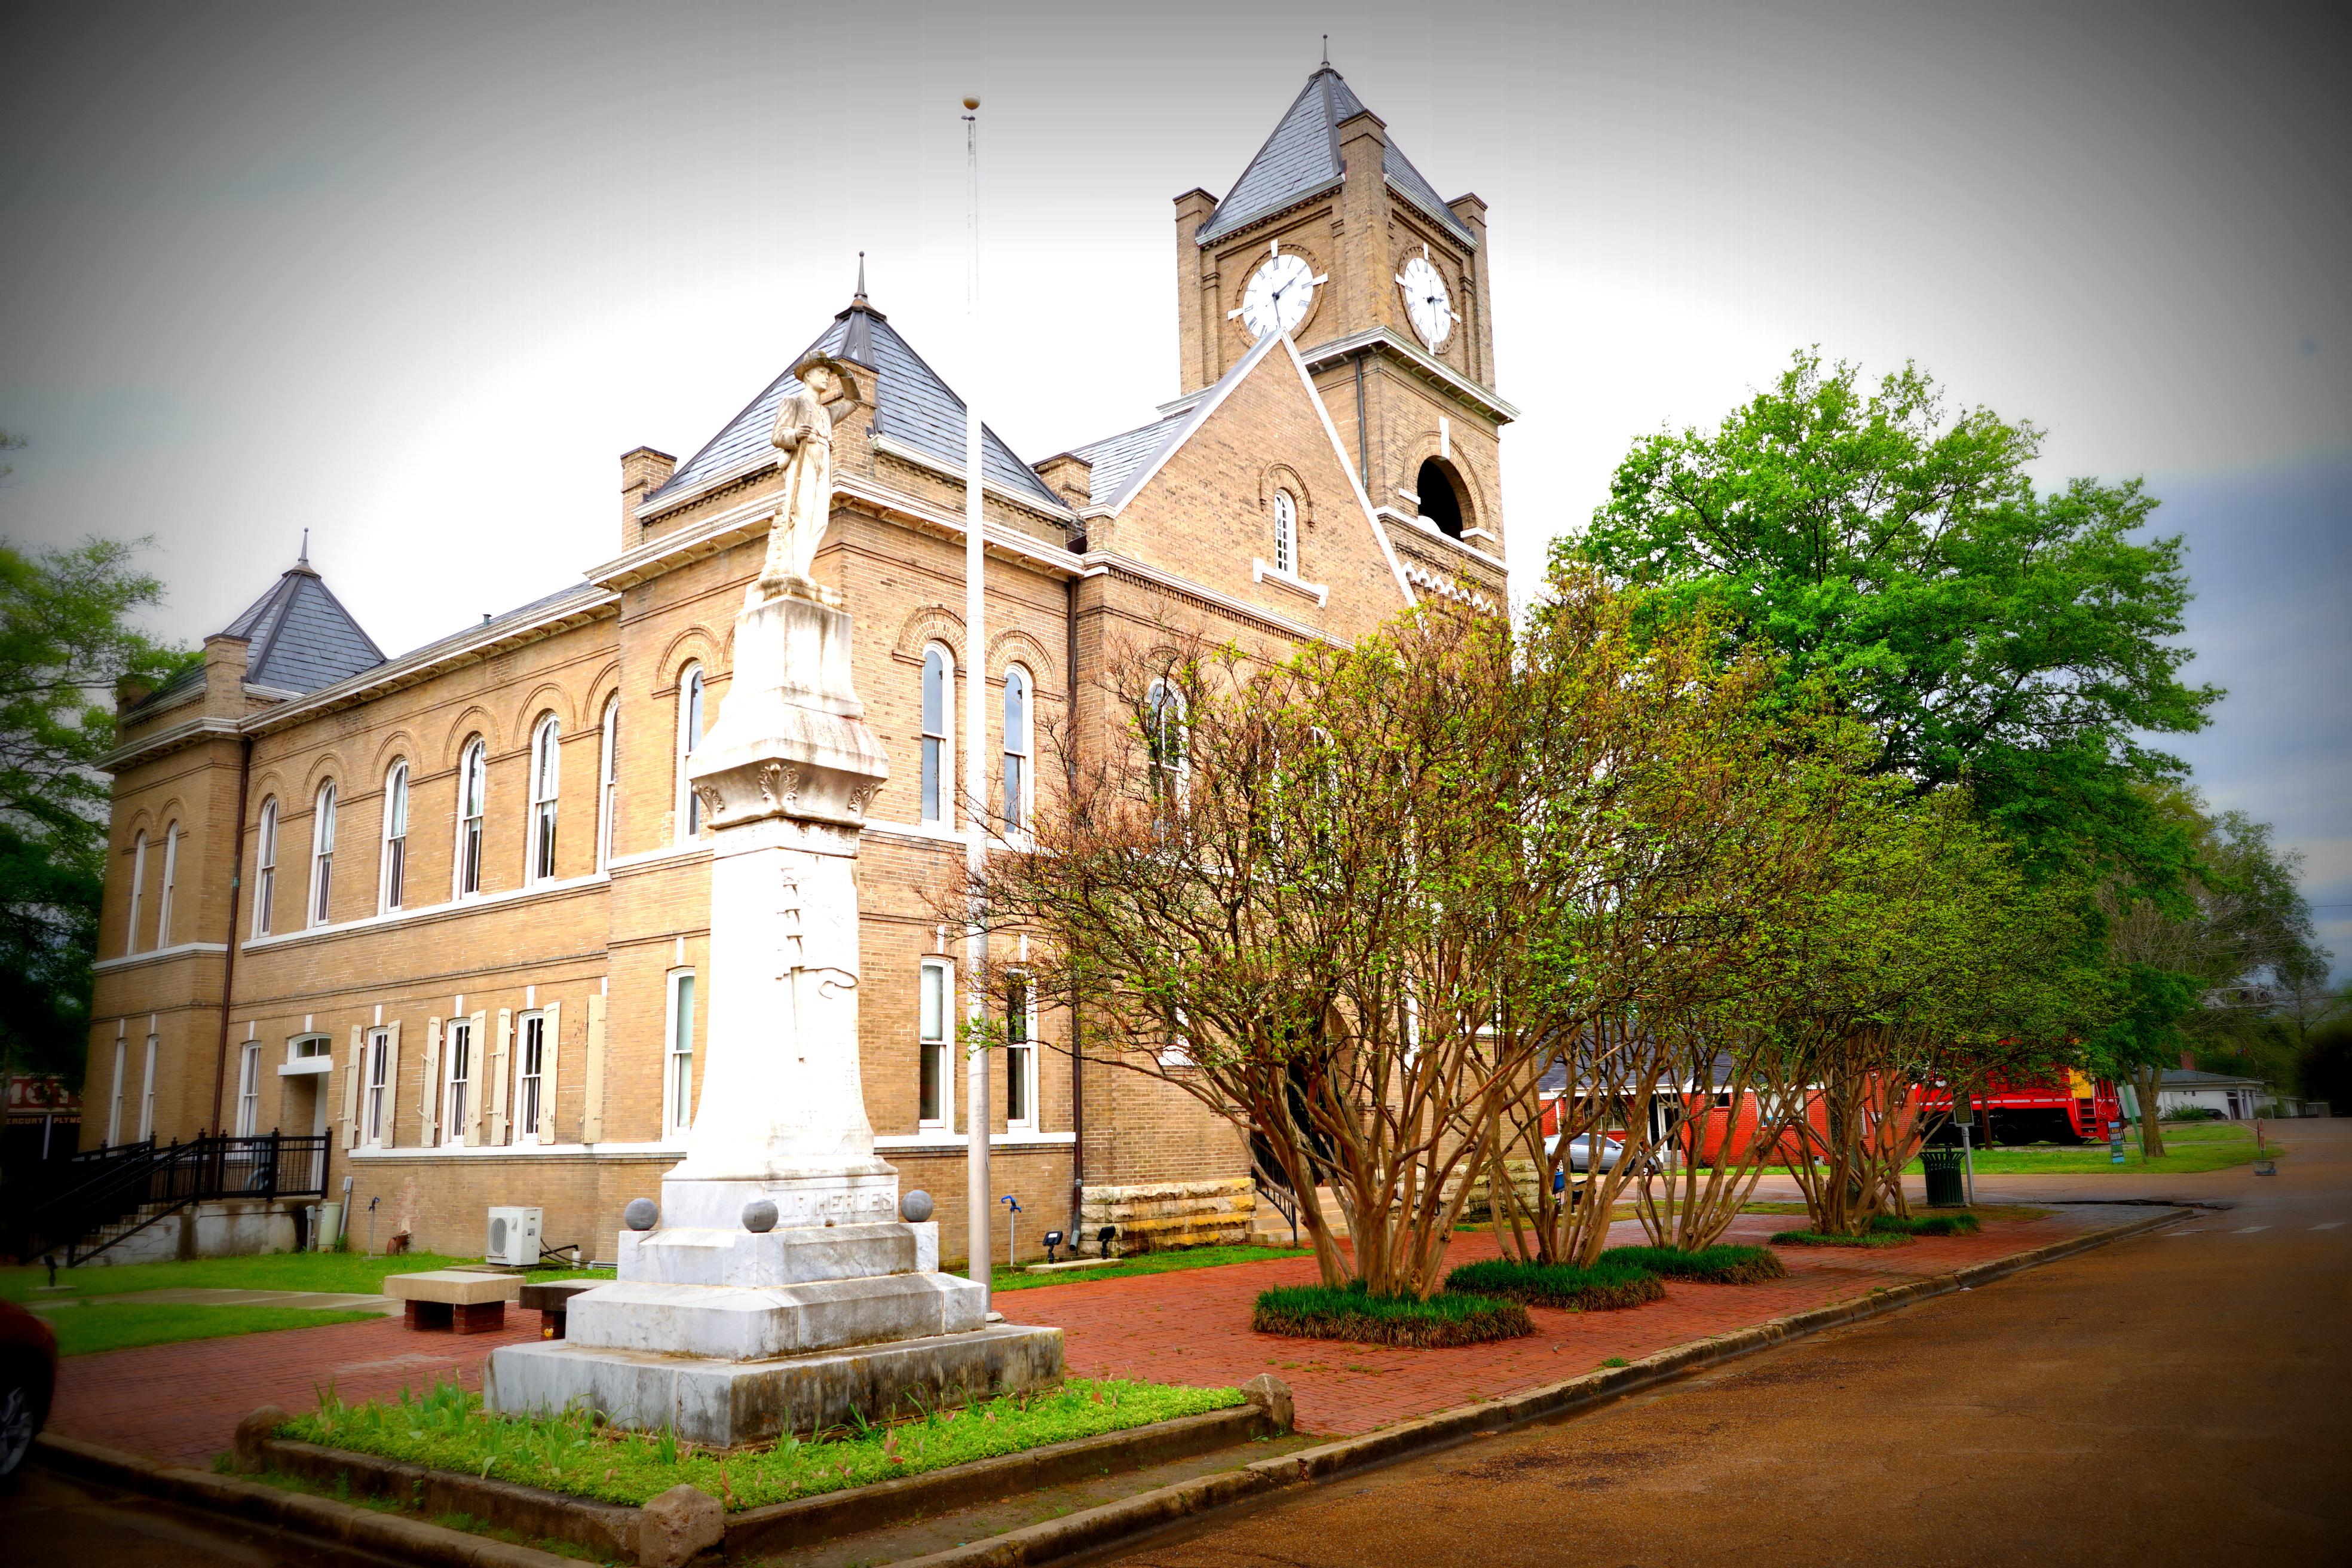 Side view of a two-story brick courthouse with a clock tower. A statue stands in front.